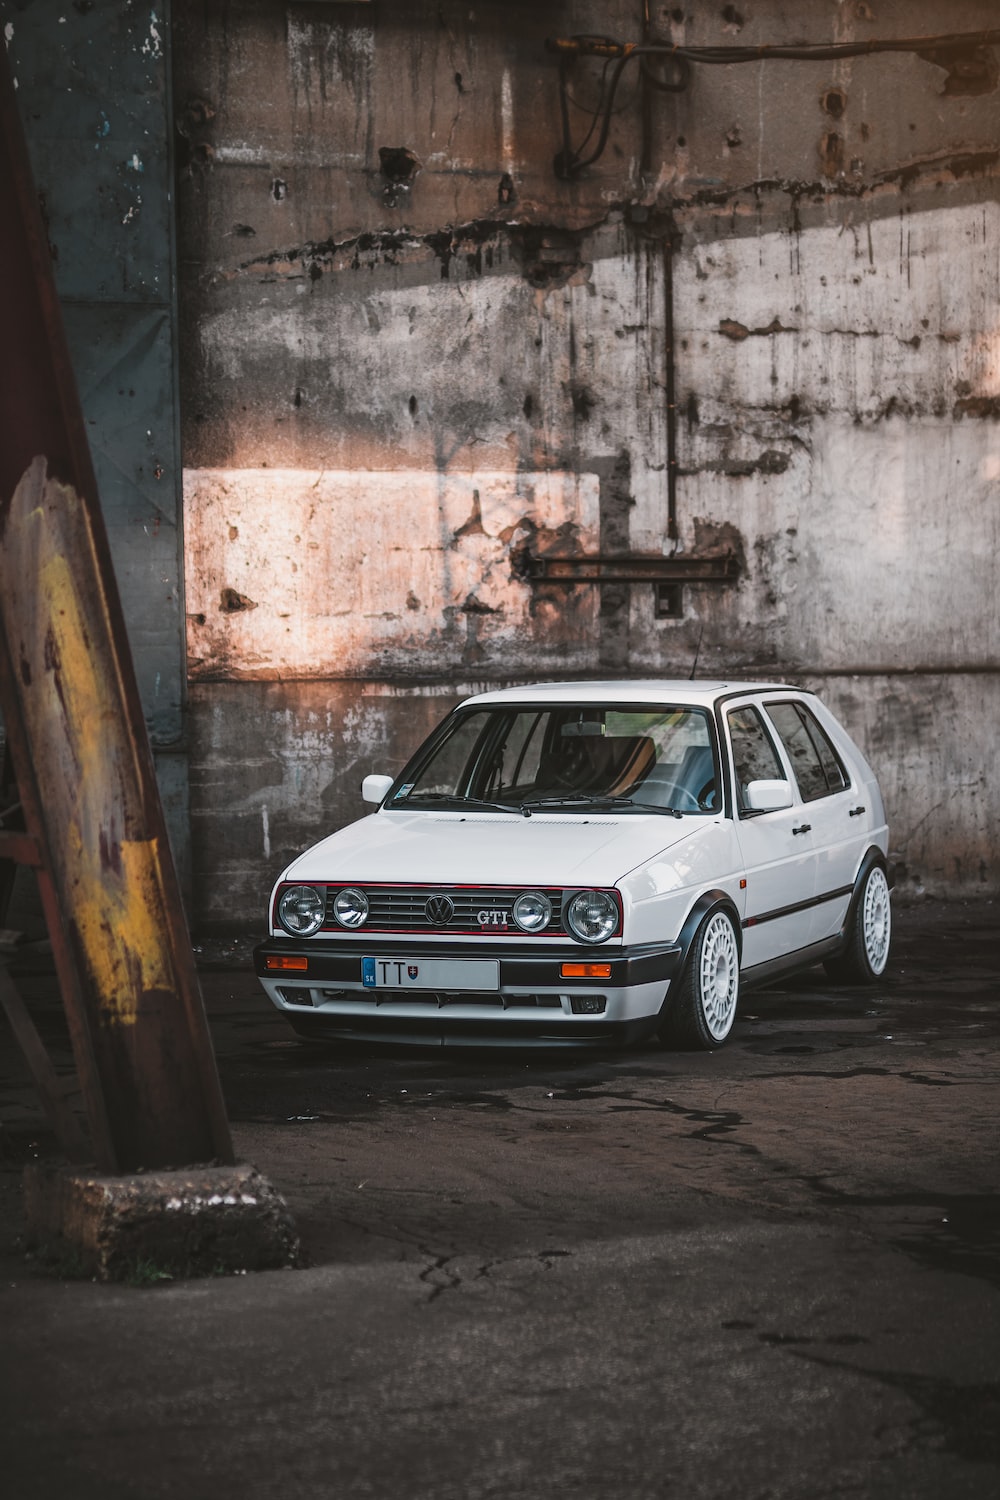 Vw golf mk pictures download free images on